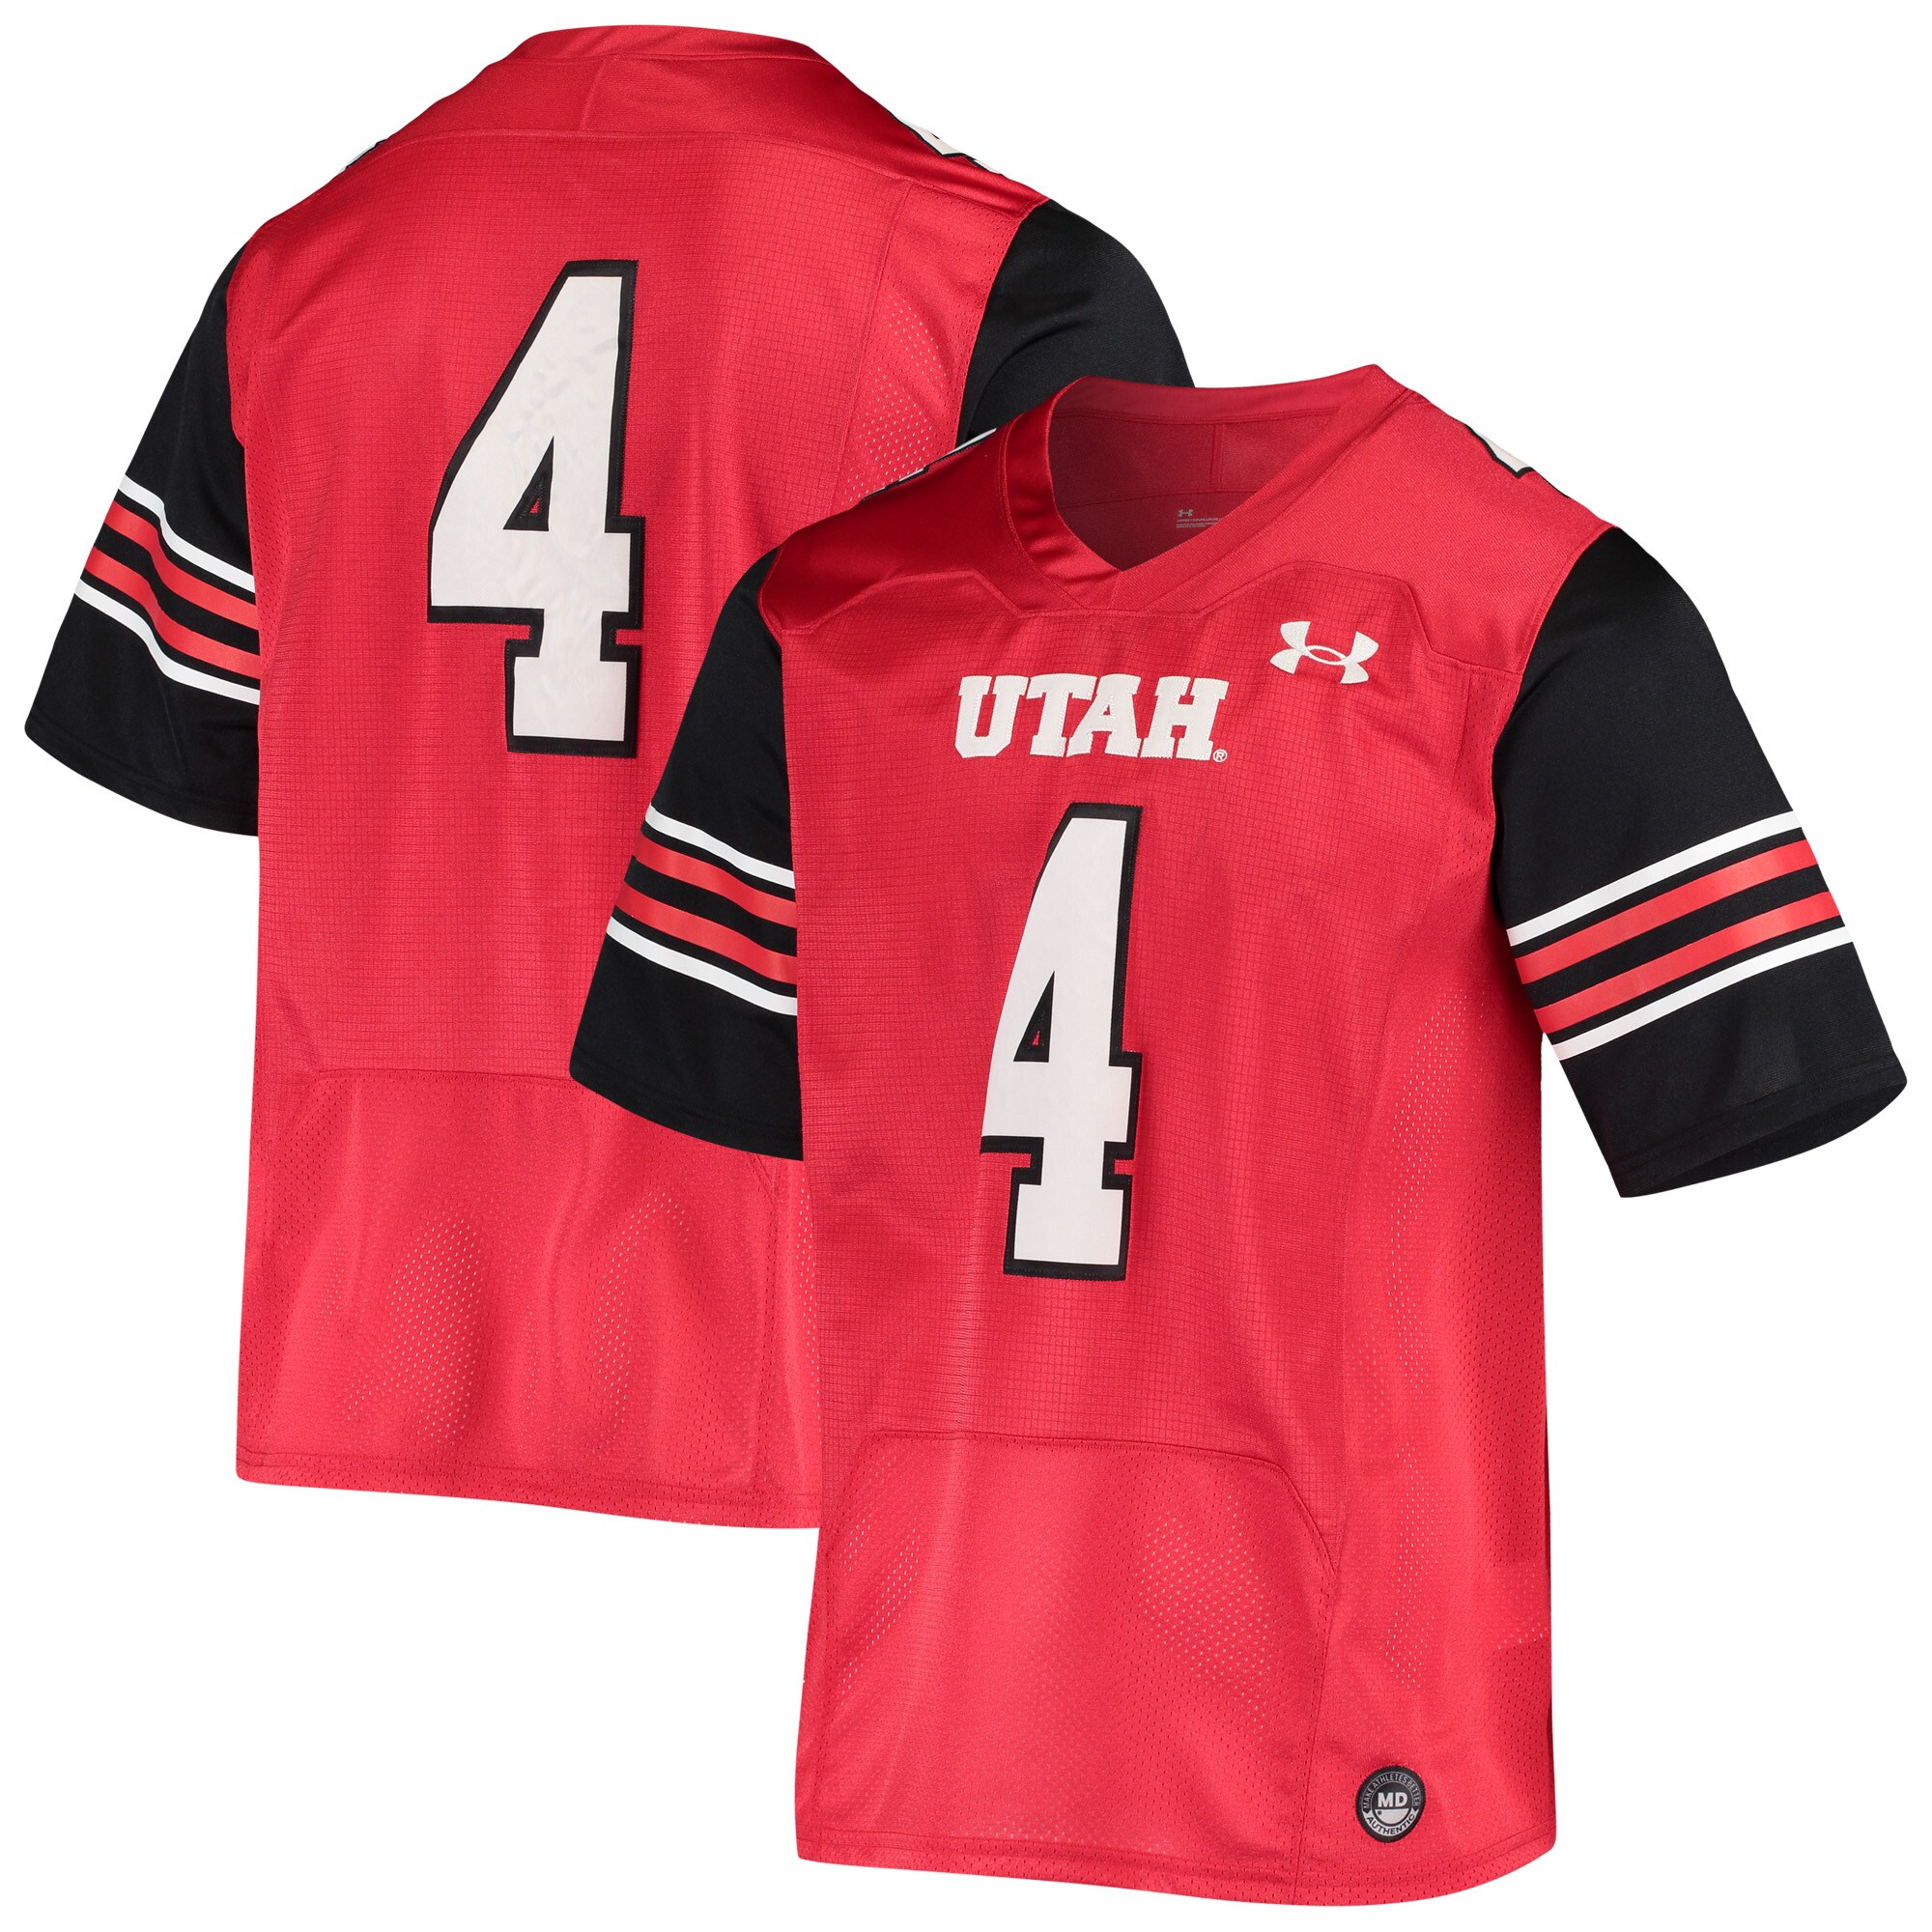 #4 Utah Utes Under Armour Premiere  Football Shirts Jersey - Red For Youth Women Men